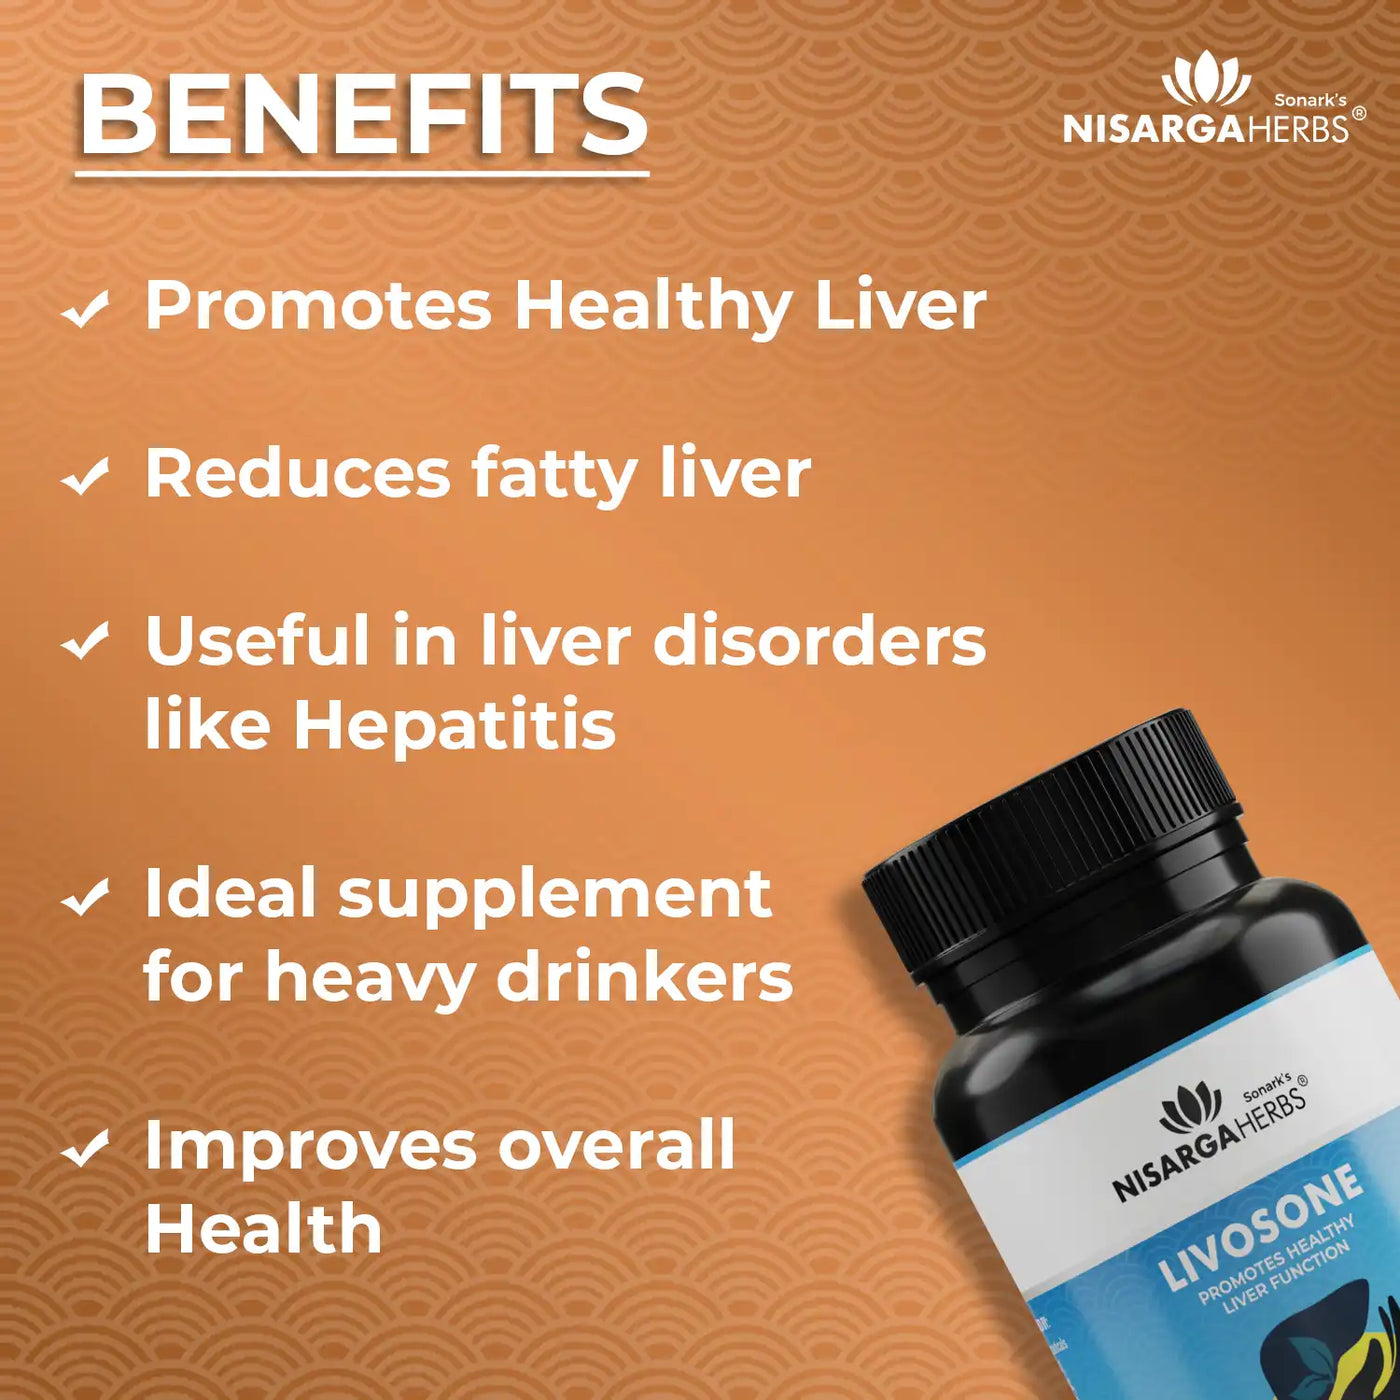 ayurvedic medicine for healthy liver function, reduce symptoms of hepatitis and fatty liver, improves overall health. 